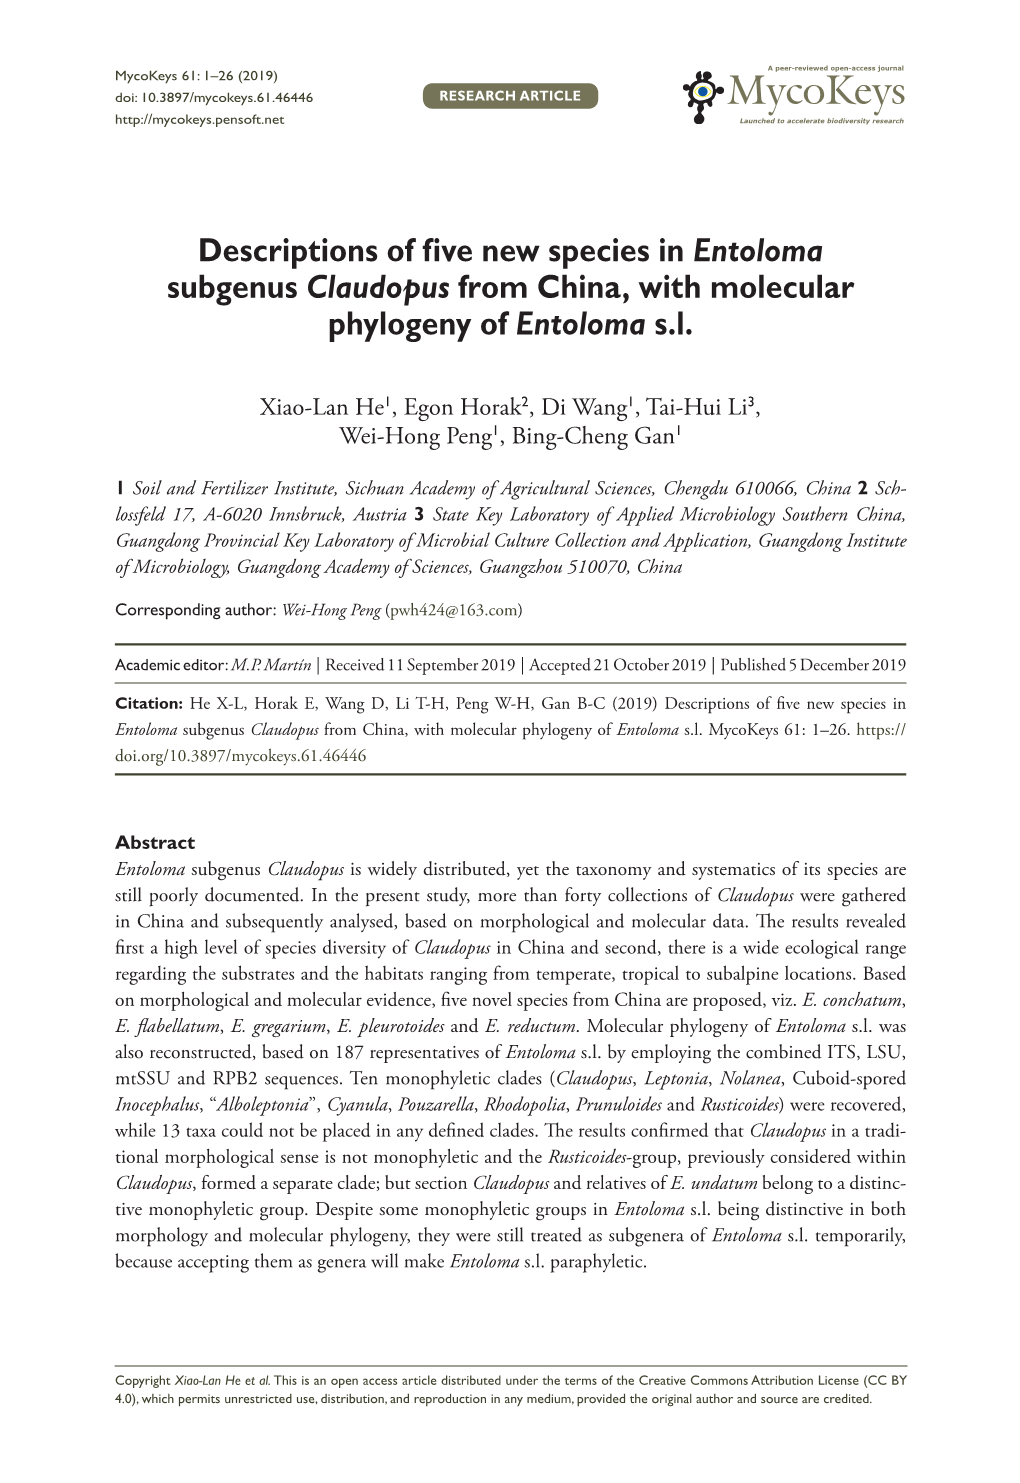 Descriptions of Five New Species in Entoloma Subgenus Claudopus from China, with Molecular Phylogeny of Entoloma S.L